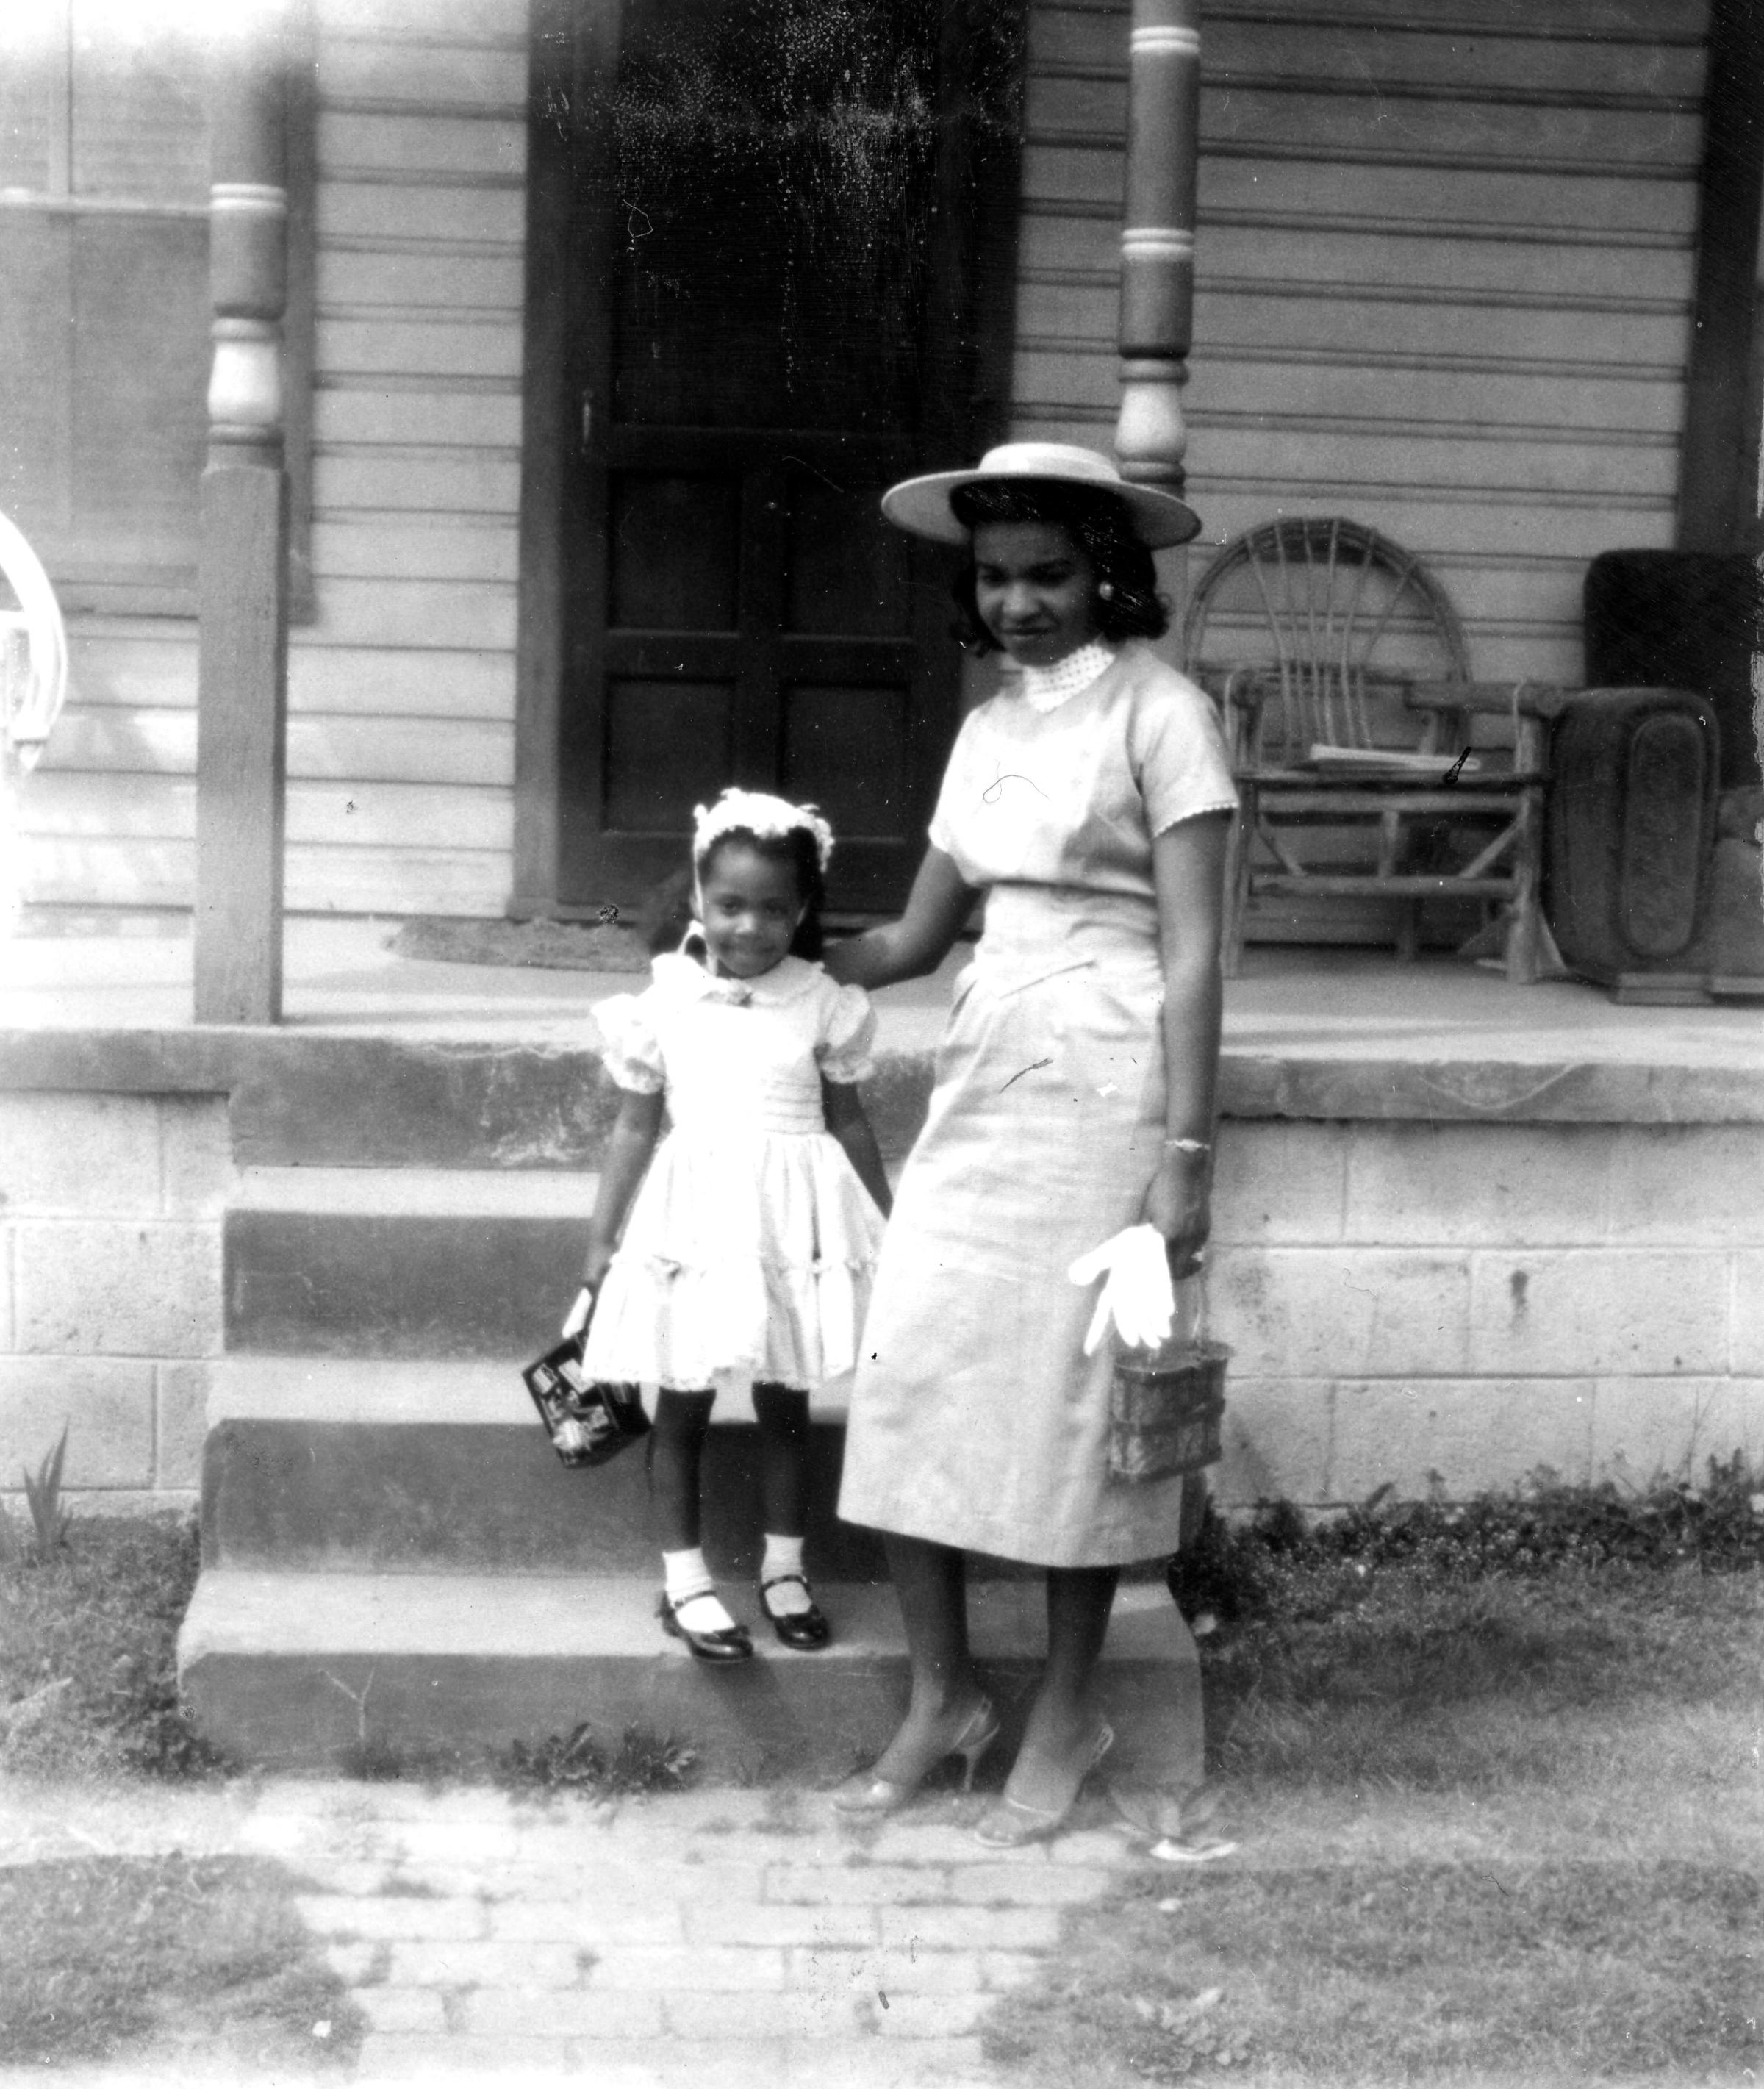 Mary Day with godchild, Kathline Lawson  Daughter of James and Catherine Lawson, Granddaughter of Anderson and Bernice Walls